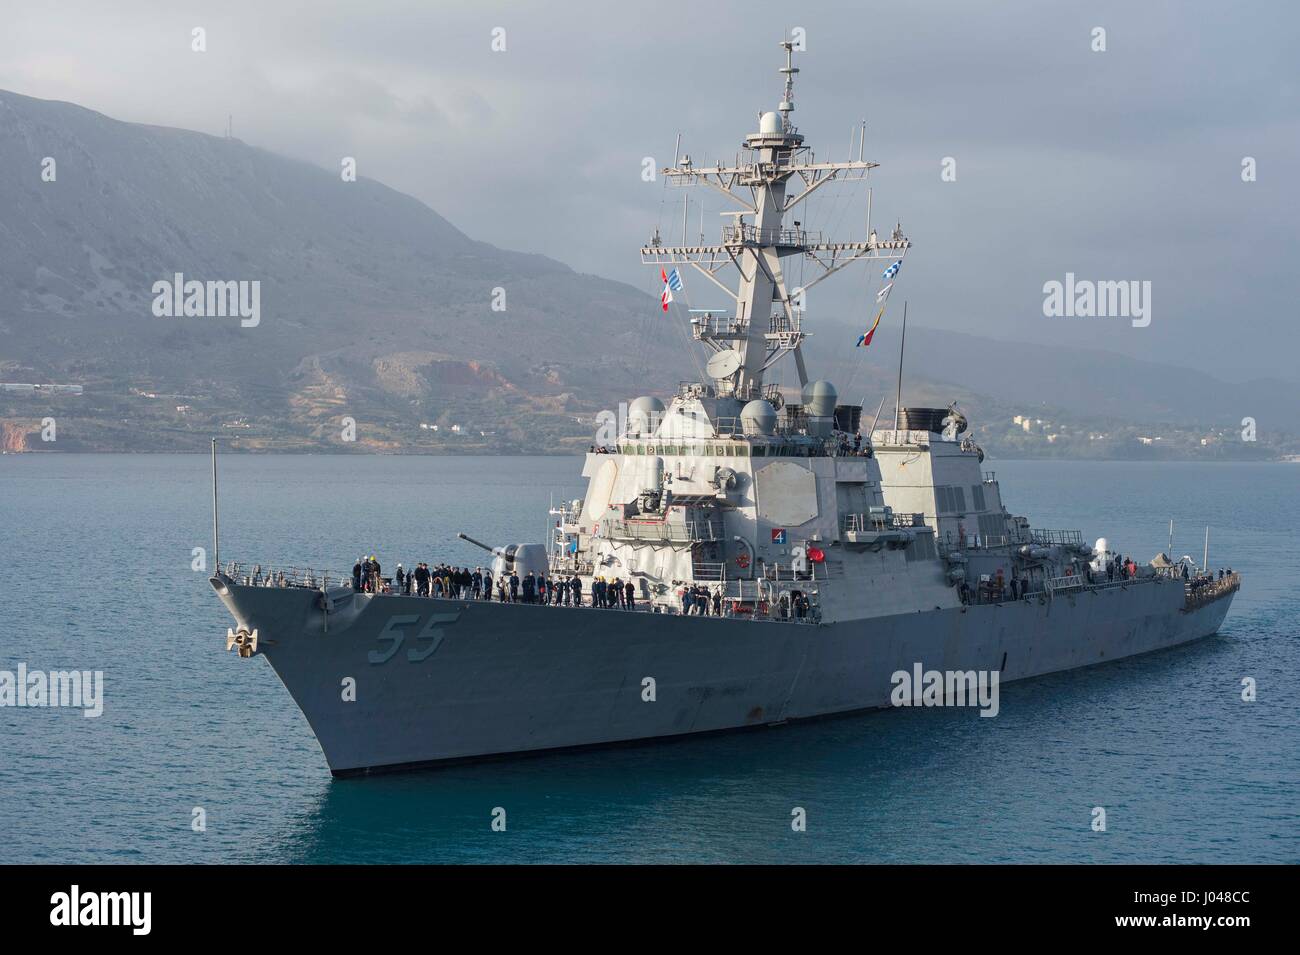 L'USN Arleigh Burke-class guidato-missile destroyer USS Stout cuoce a vapore in corso Dicembre 2, 2013 in Souda Bay, Grecia. (Foto di MCS3 Jackie Hart /US Navy via Planetpix) Foto Stock